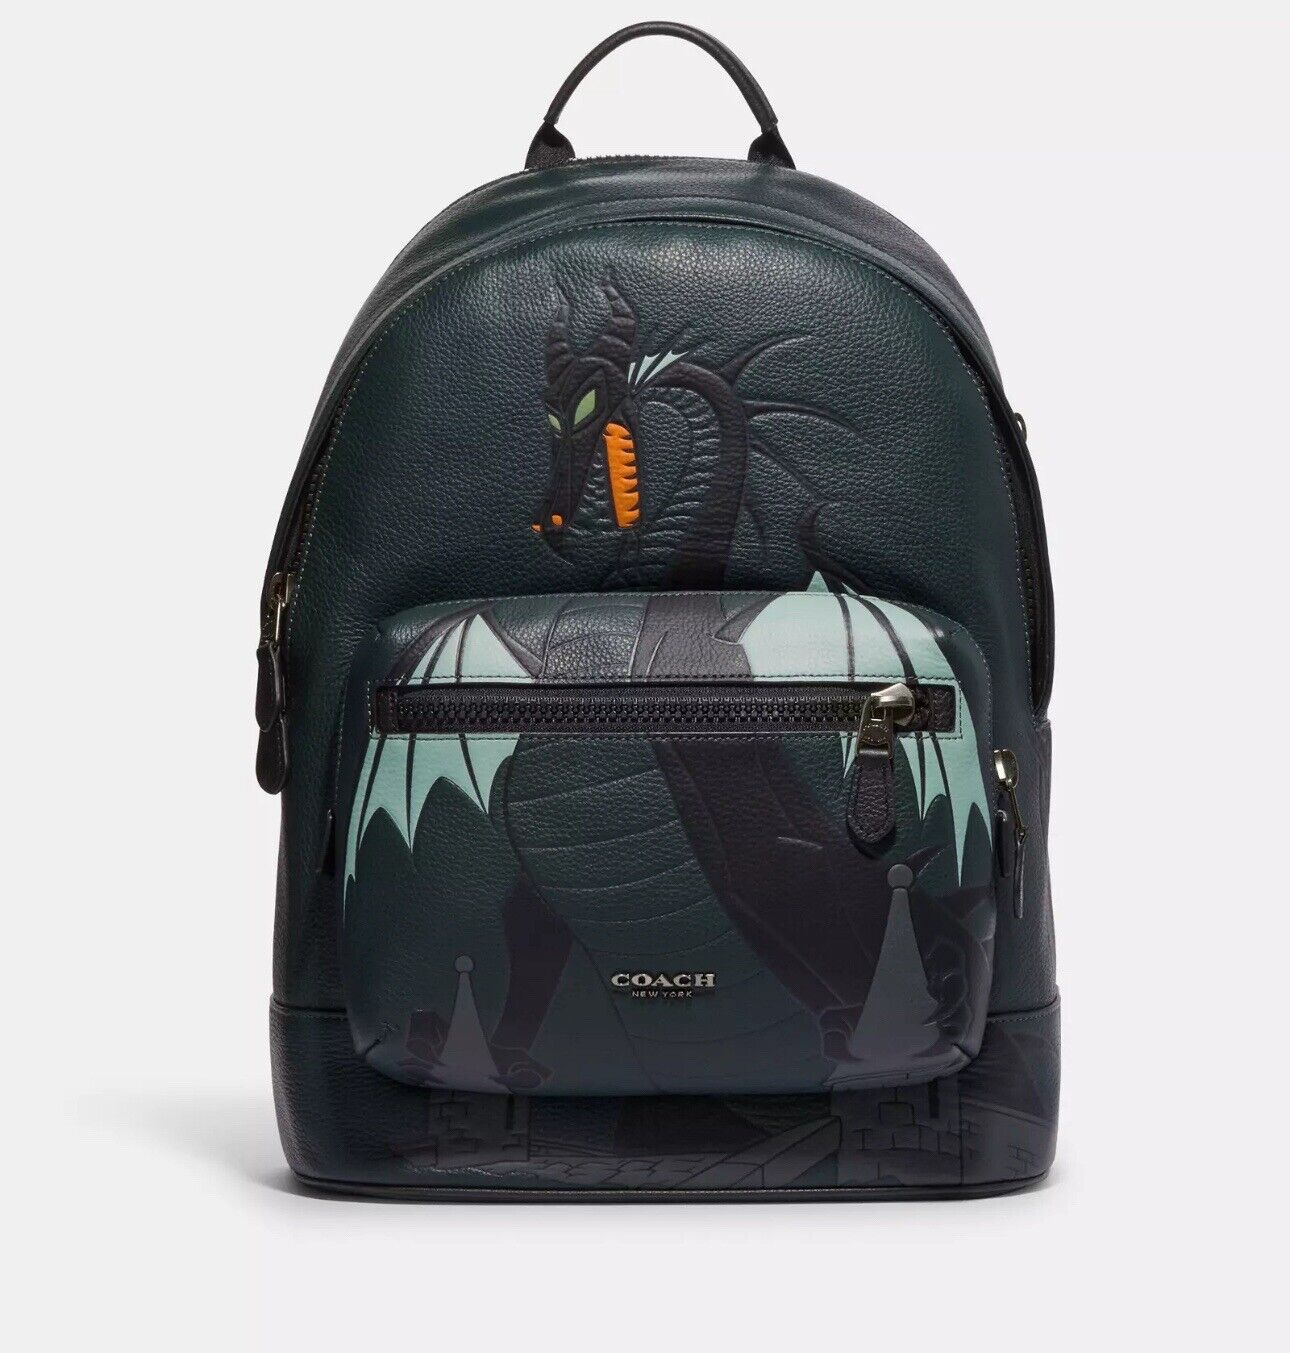 Disney X Coach West Backpack With Maleficent Dragon Villains Motif